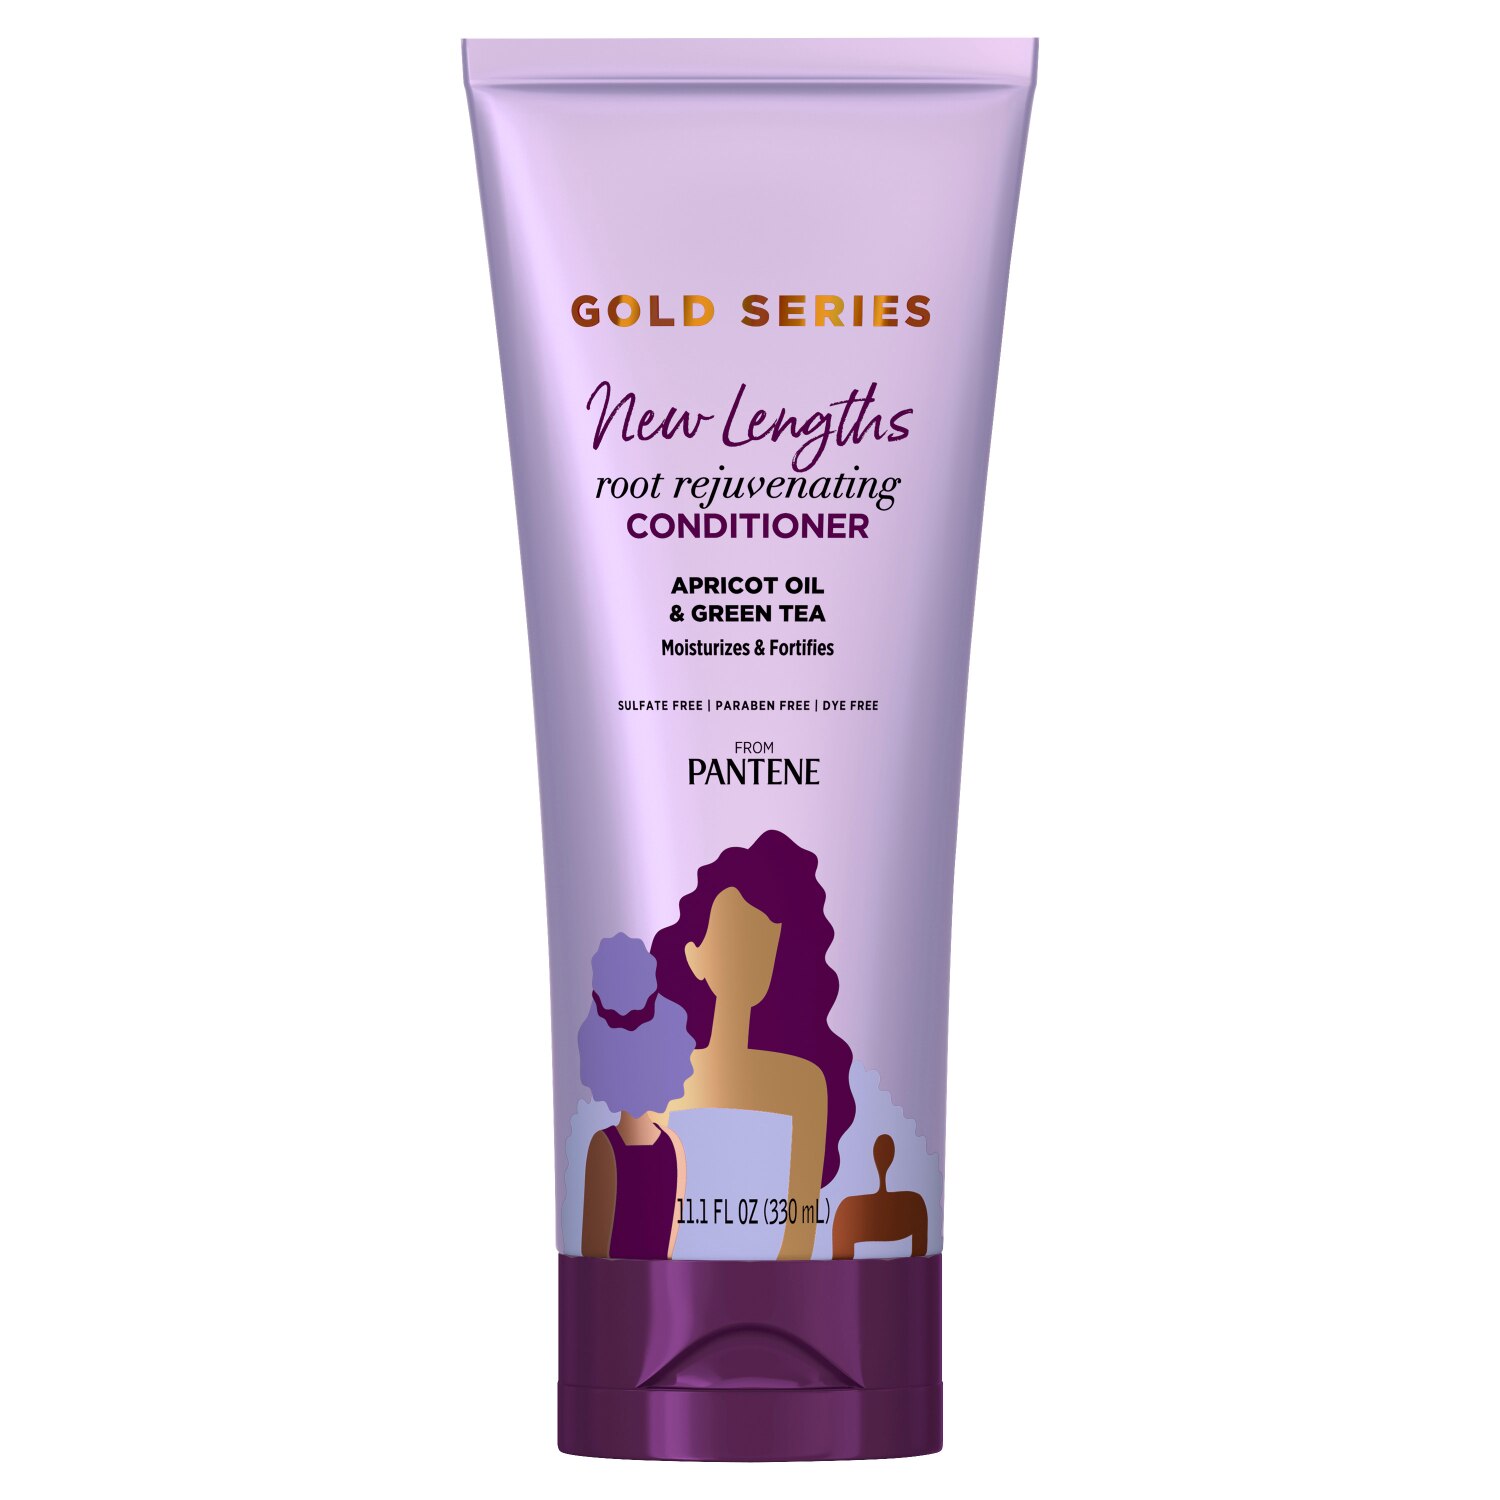 Gold Series from Pantene New Lengths Root Rejuvenating Conditioner for Natural, Textured, Curly, Coily Hair, 11.1 OZ